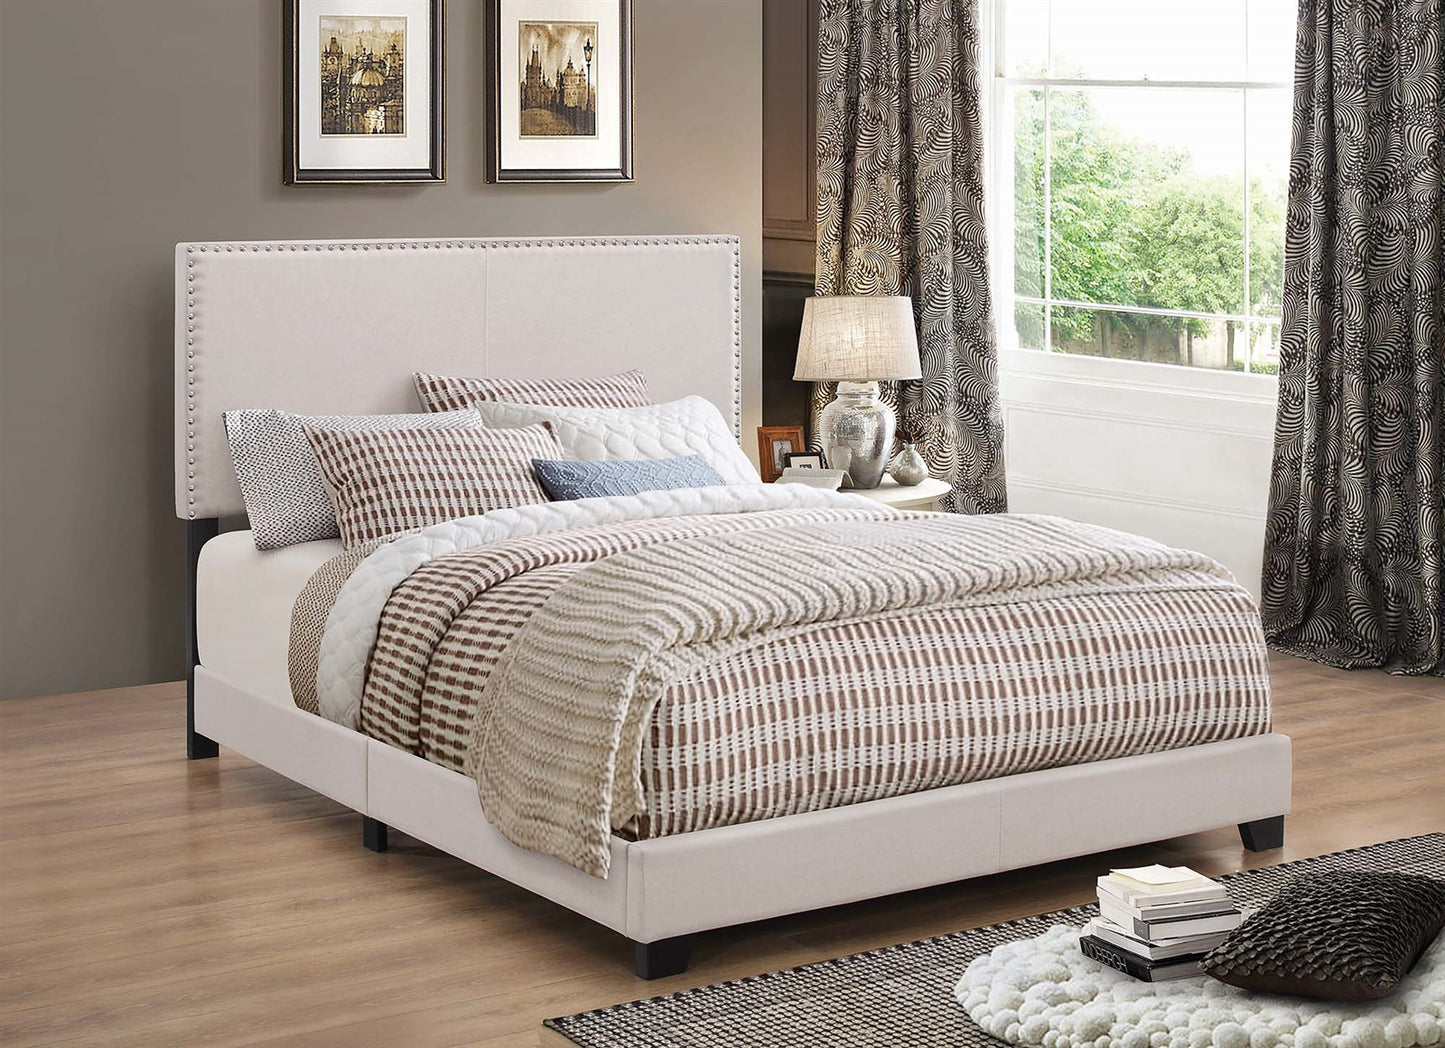 Indi Ivory Upholstered Twin Bed with Nailhead Trim